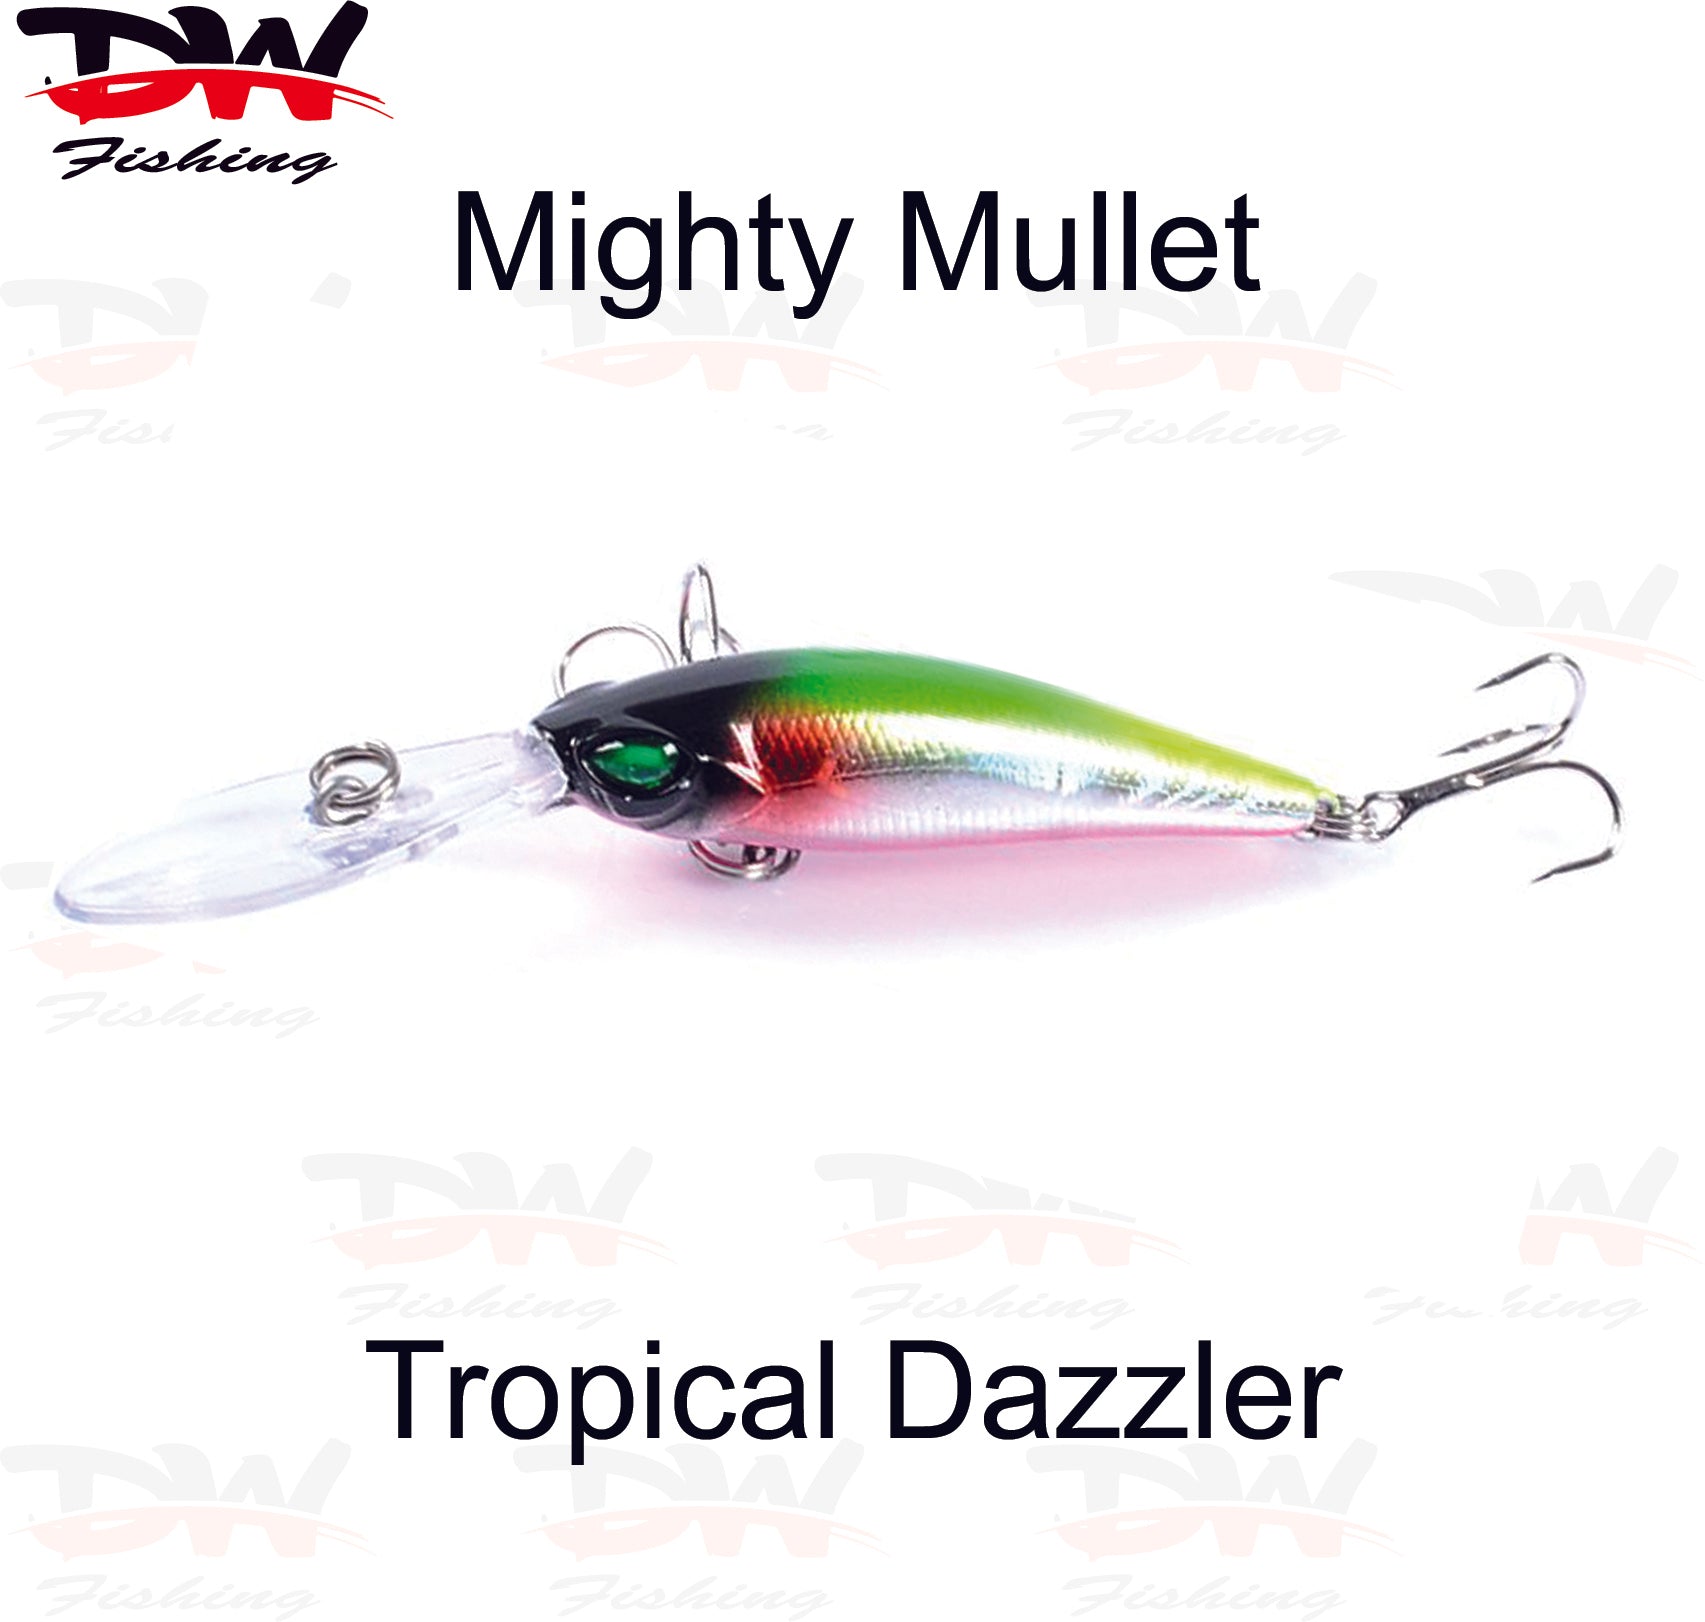 DW Lures Mighty Mullet 60